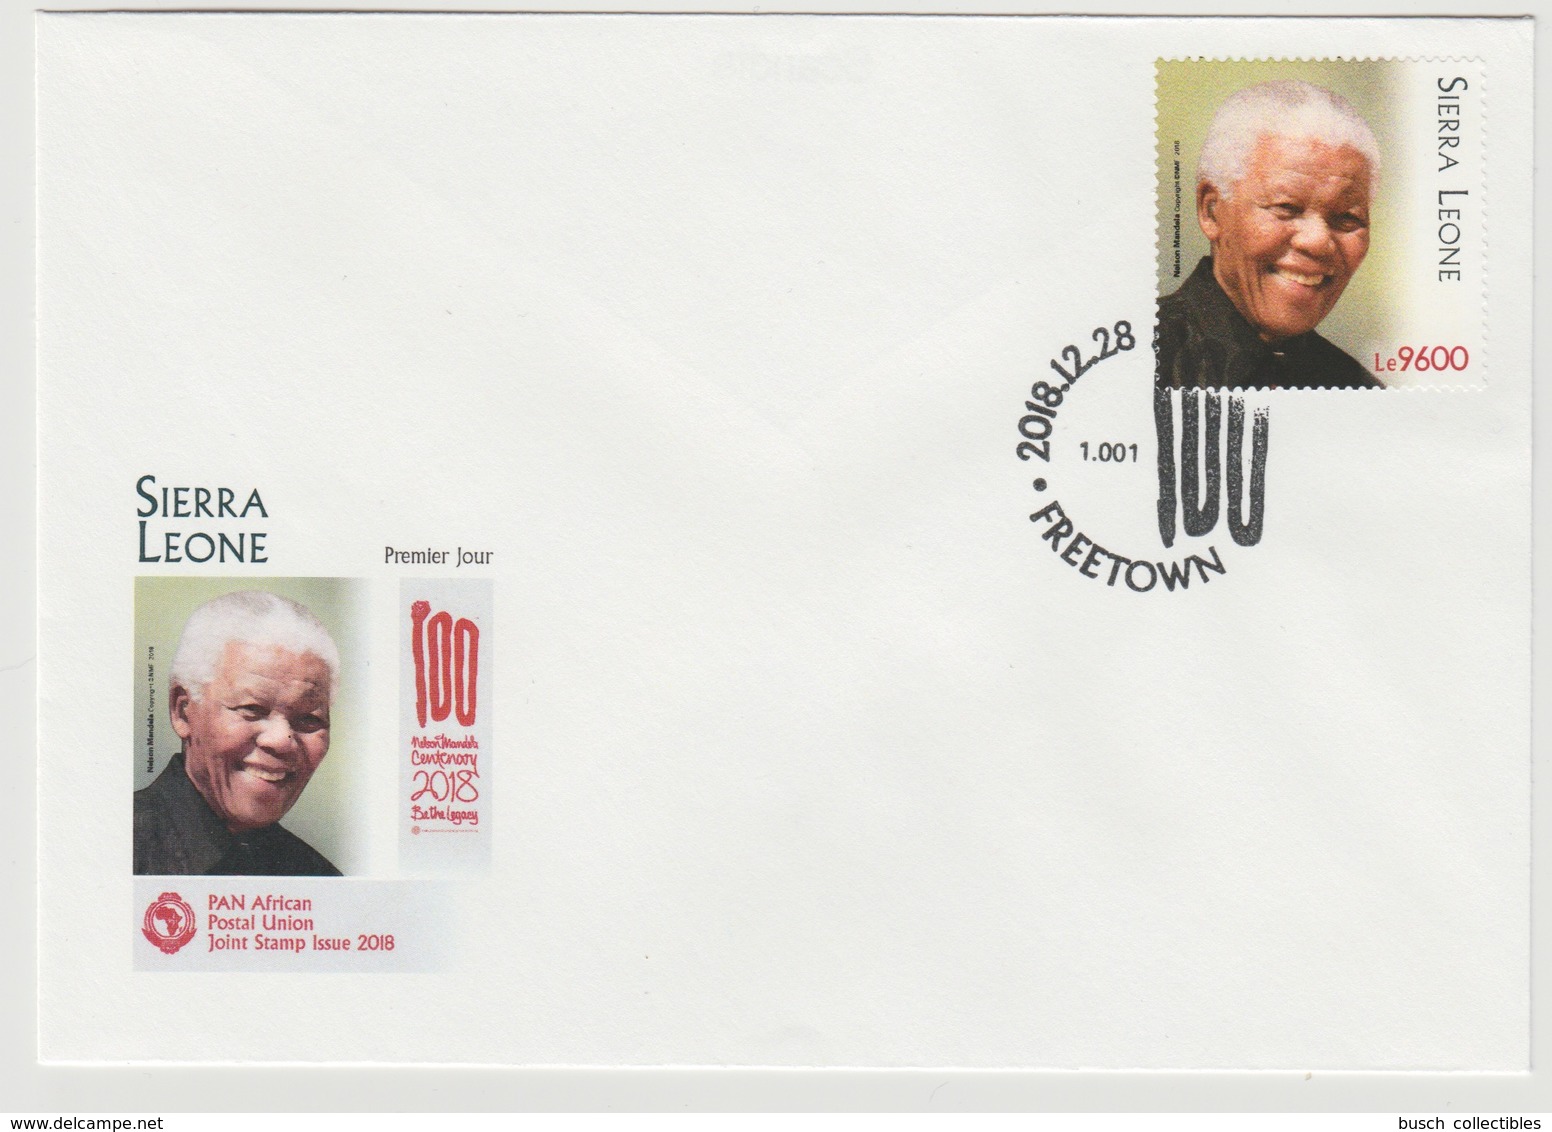 Sierra Leone 2018 Stamp FDC First Day Cover 1er Jour Joint Issue PAN African Postal Union Nelson Mandela Madiba - Emisiones Comunes